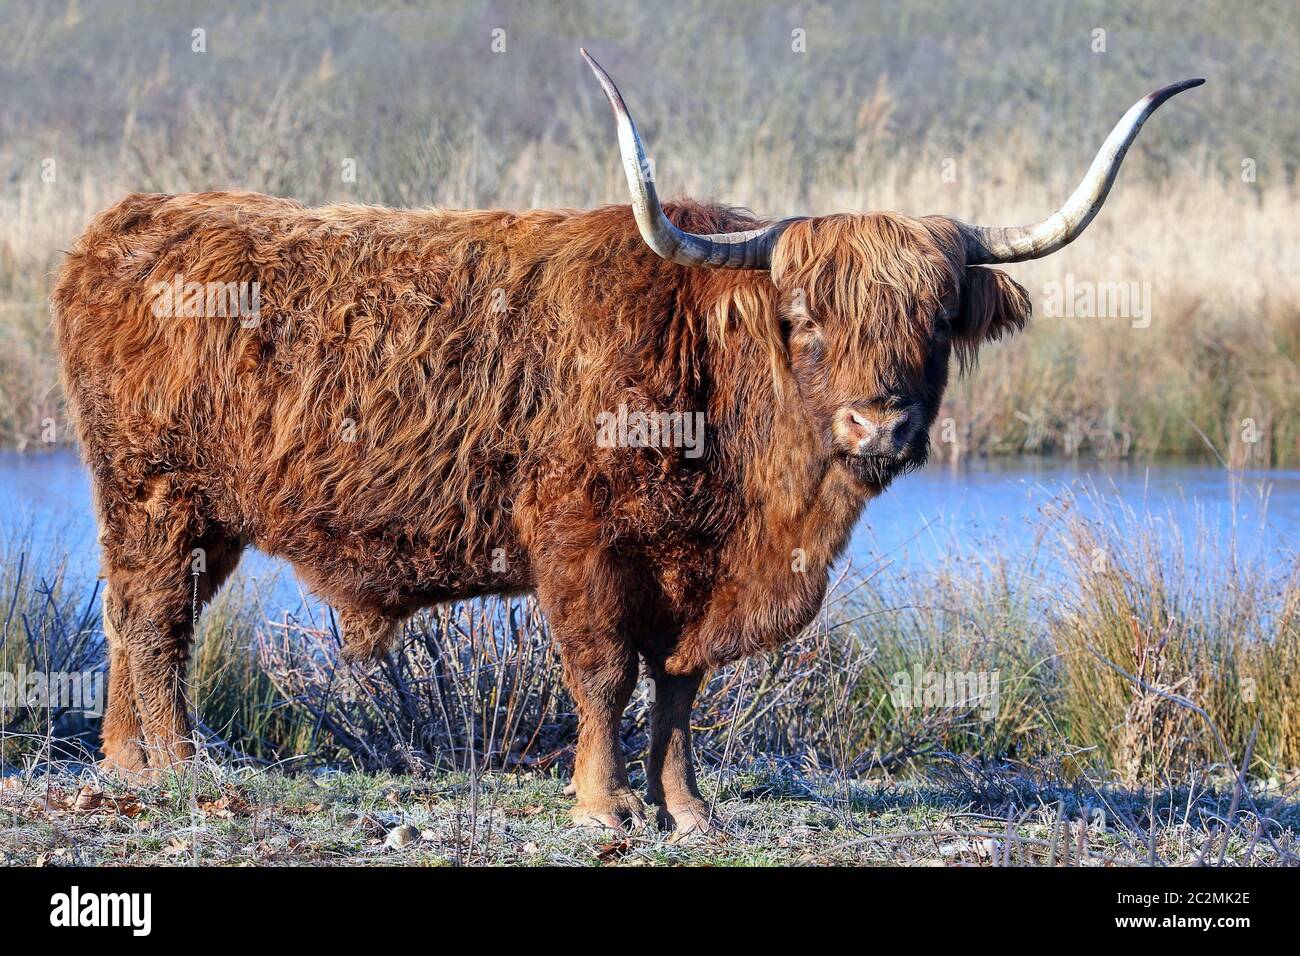 Scottish Highland cattle on an icy winter morning Stock Photo